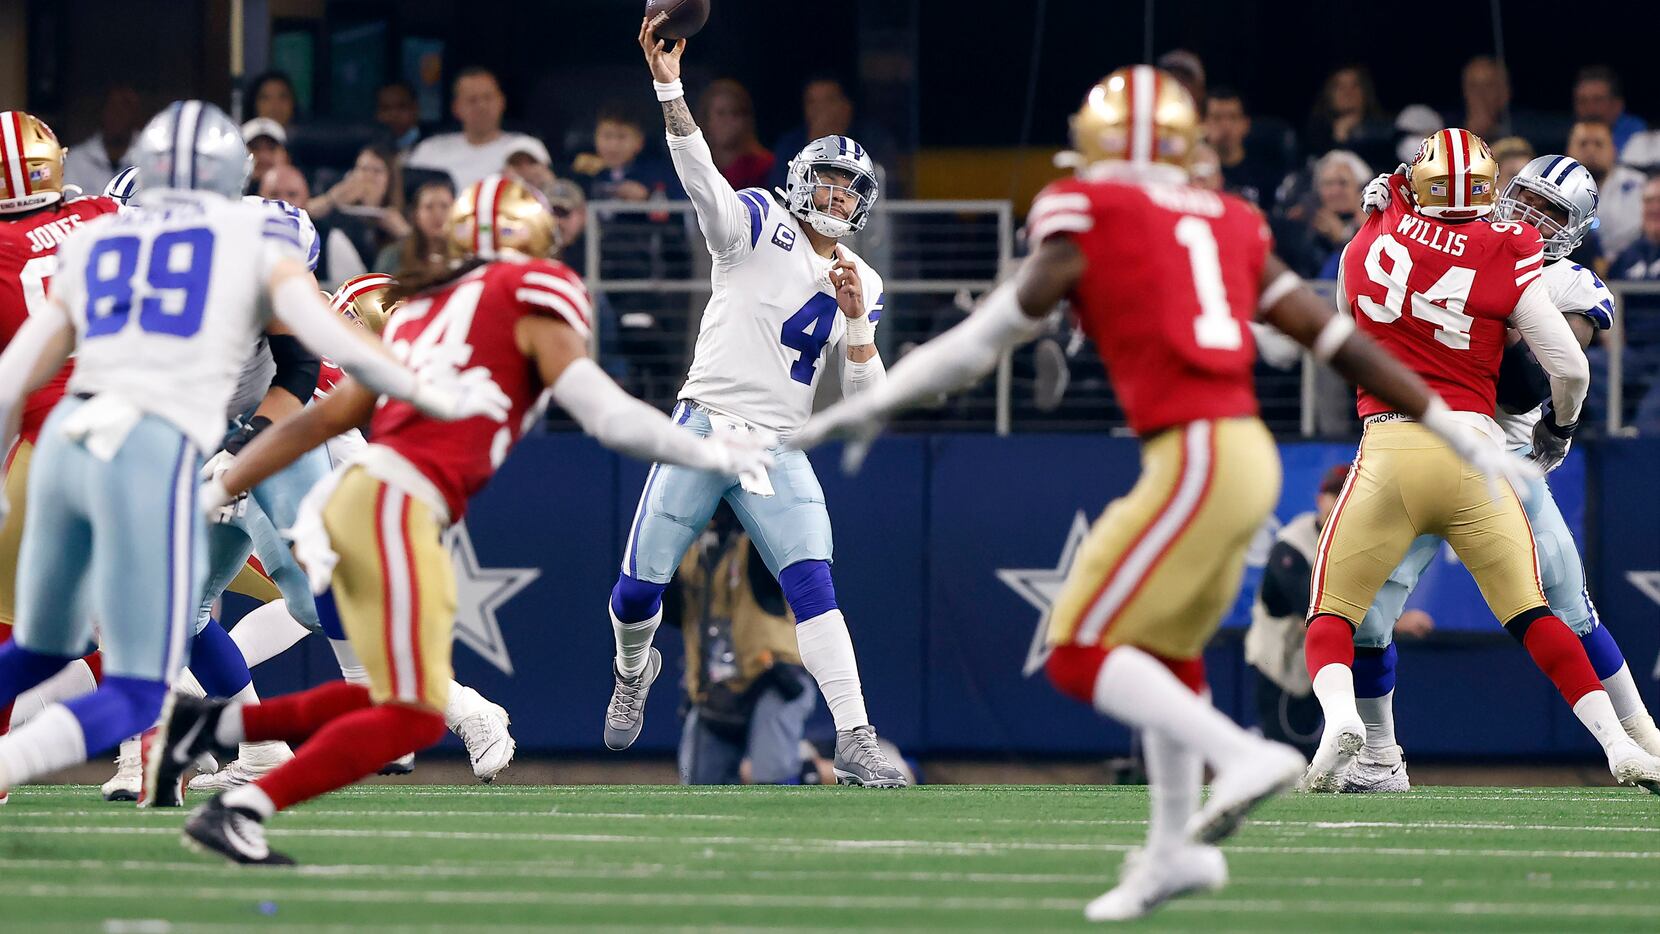 Hot ticket: Cowboys-49ers is the NFL's best-selling divisional